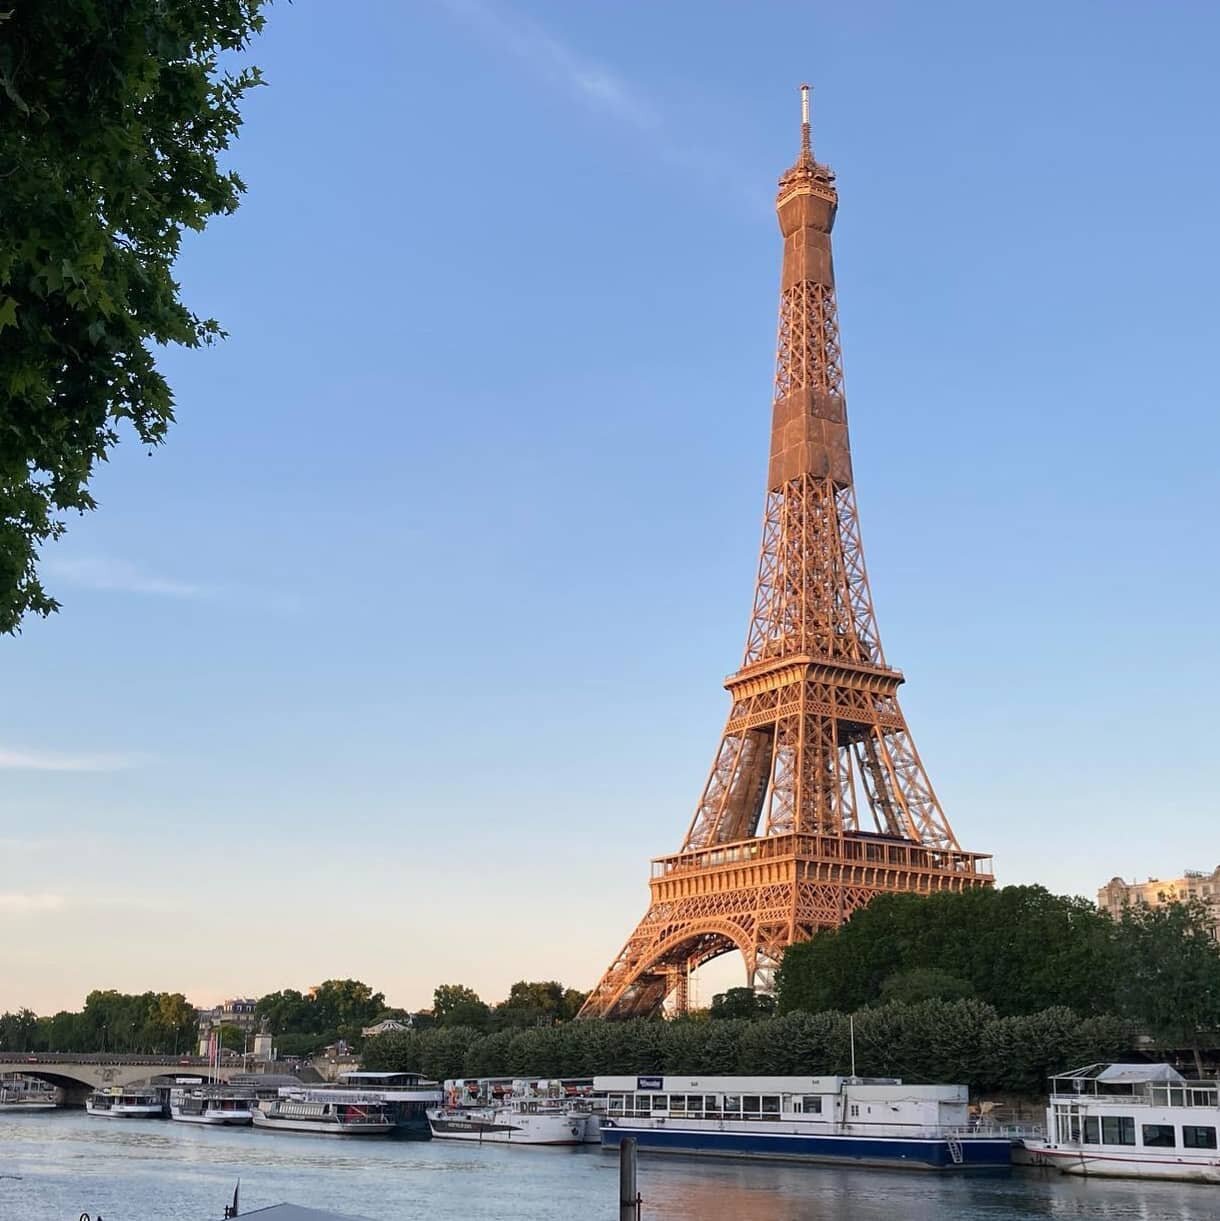 Oh this thing? Yeah, it's still in Paris. It'll be waiting for you. The new normal is settling in, slowly, but we're feeling hopeful about travel in the coming months. Is anyone out there planning a trip to Paris soon? We'd love to hear from you!
.
.